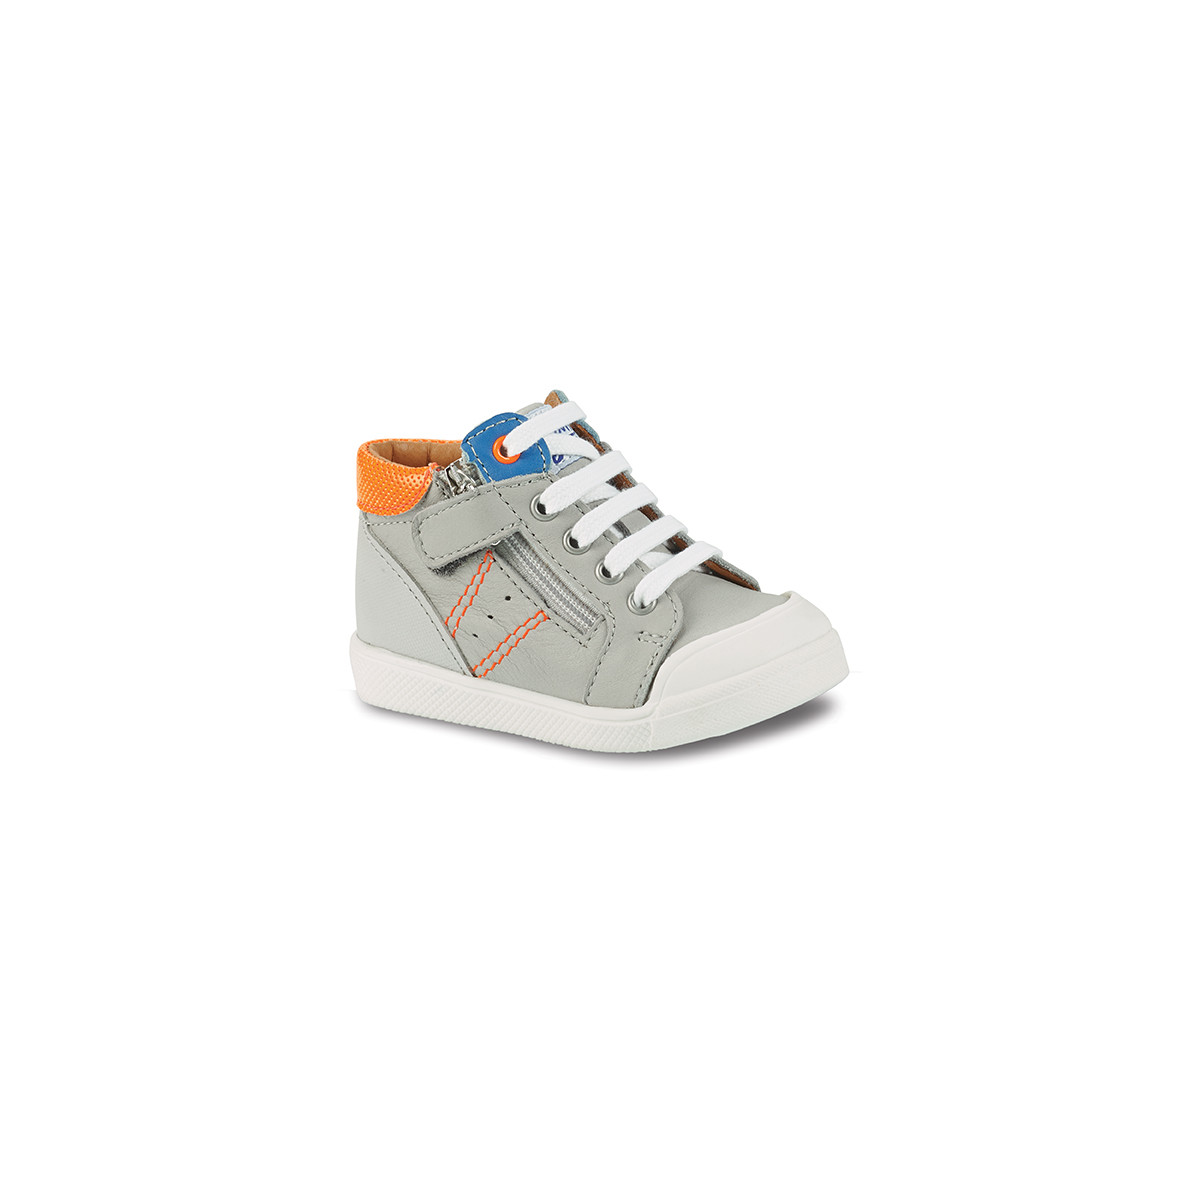 Shoes Boy High top trainers GBB ANATOLE Grey